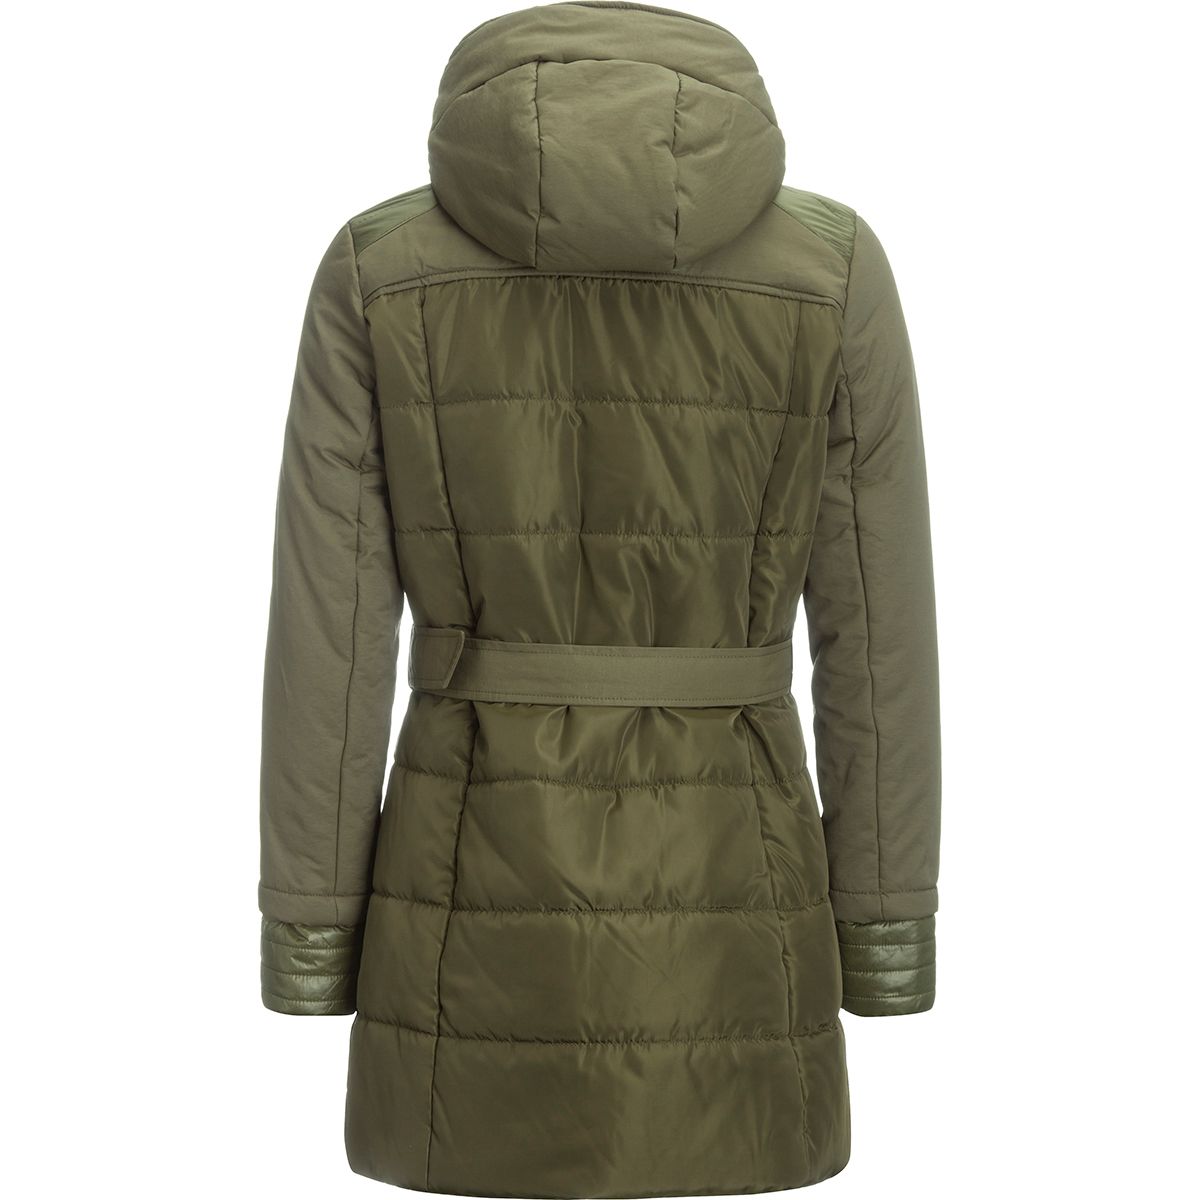 Stoic Insulated Belted Jacket - Women's | Backcountry.com